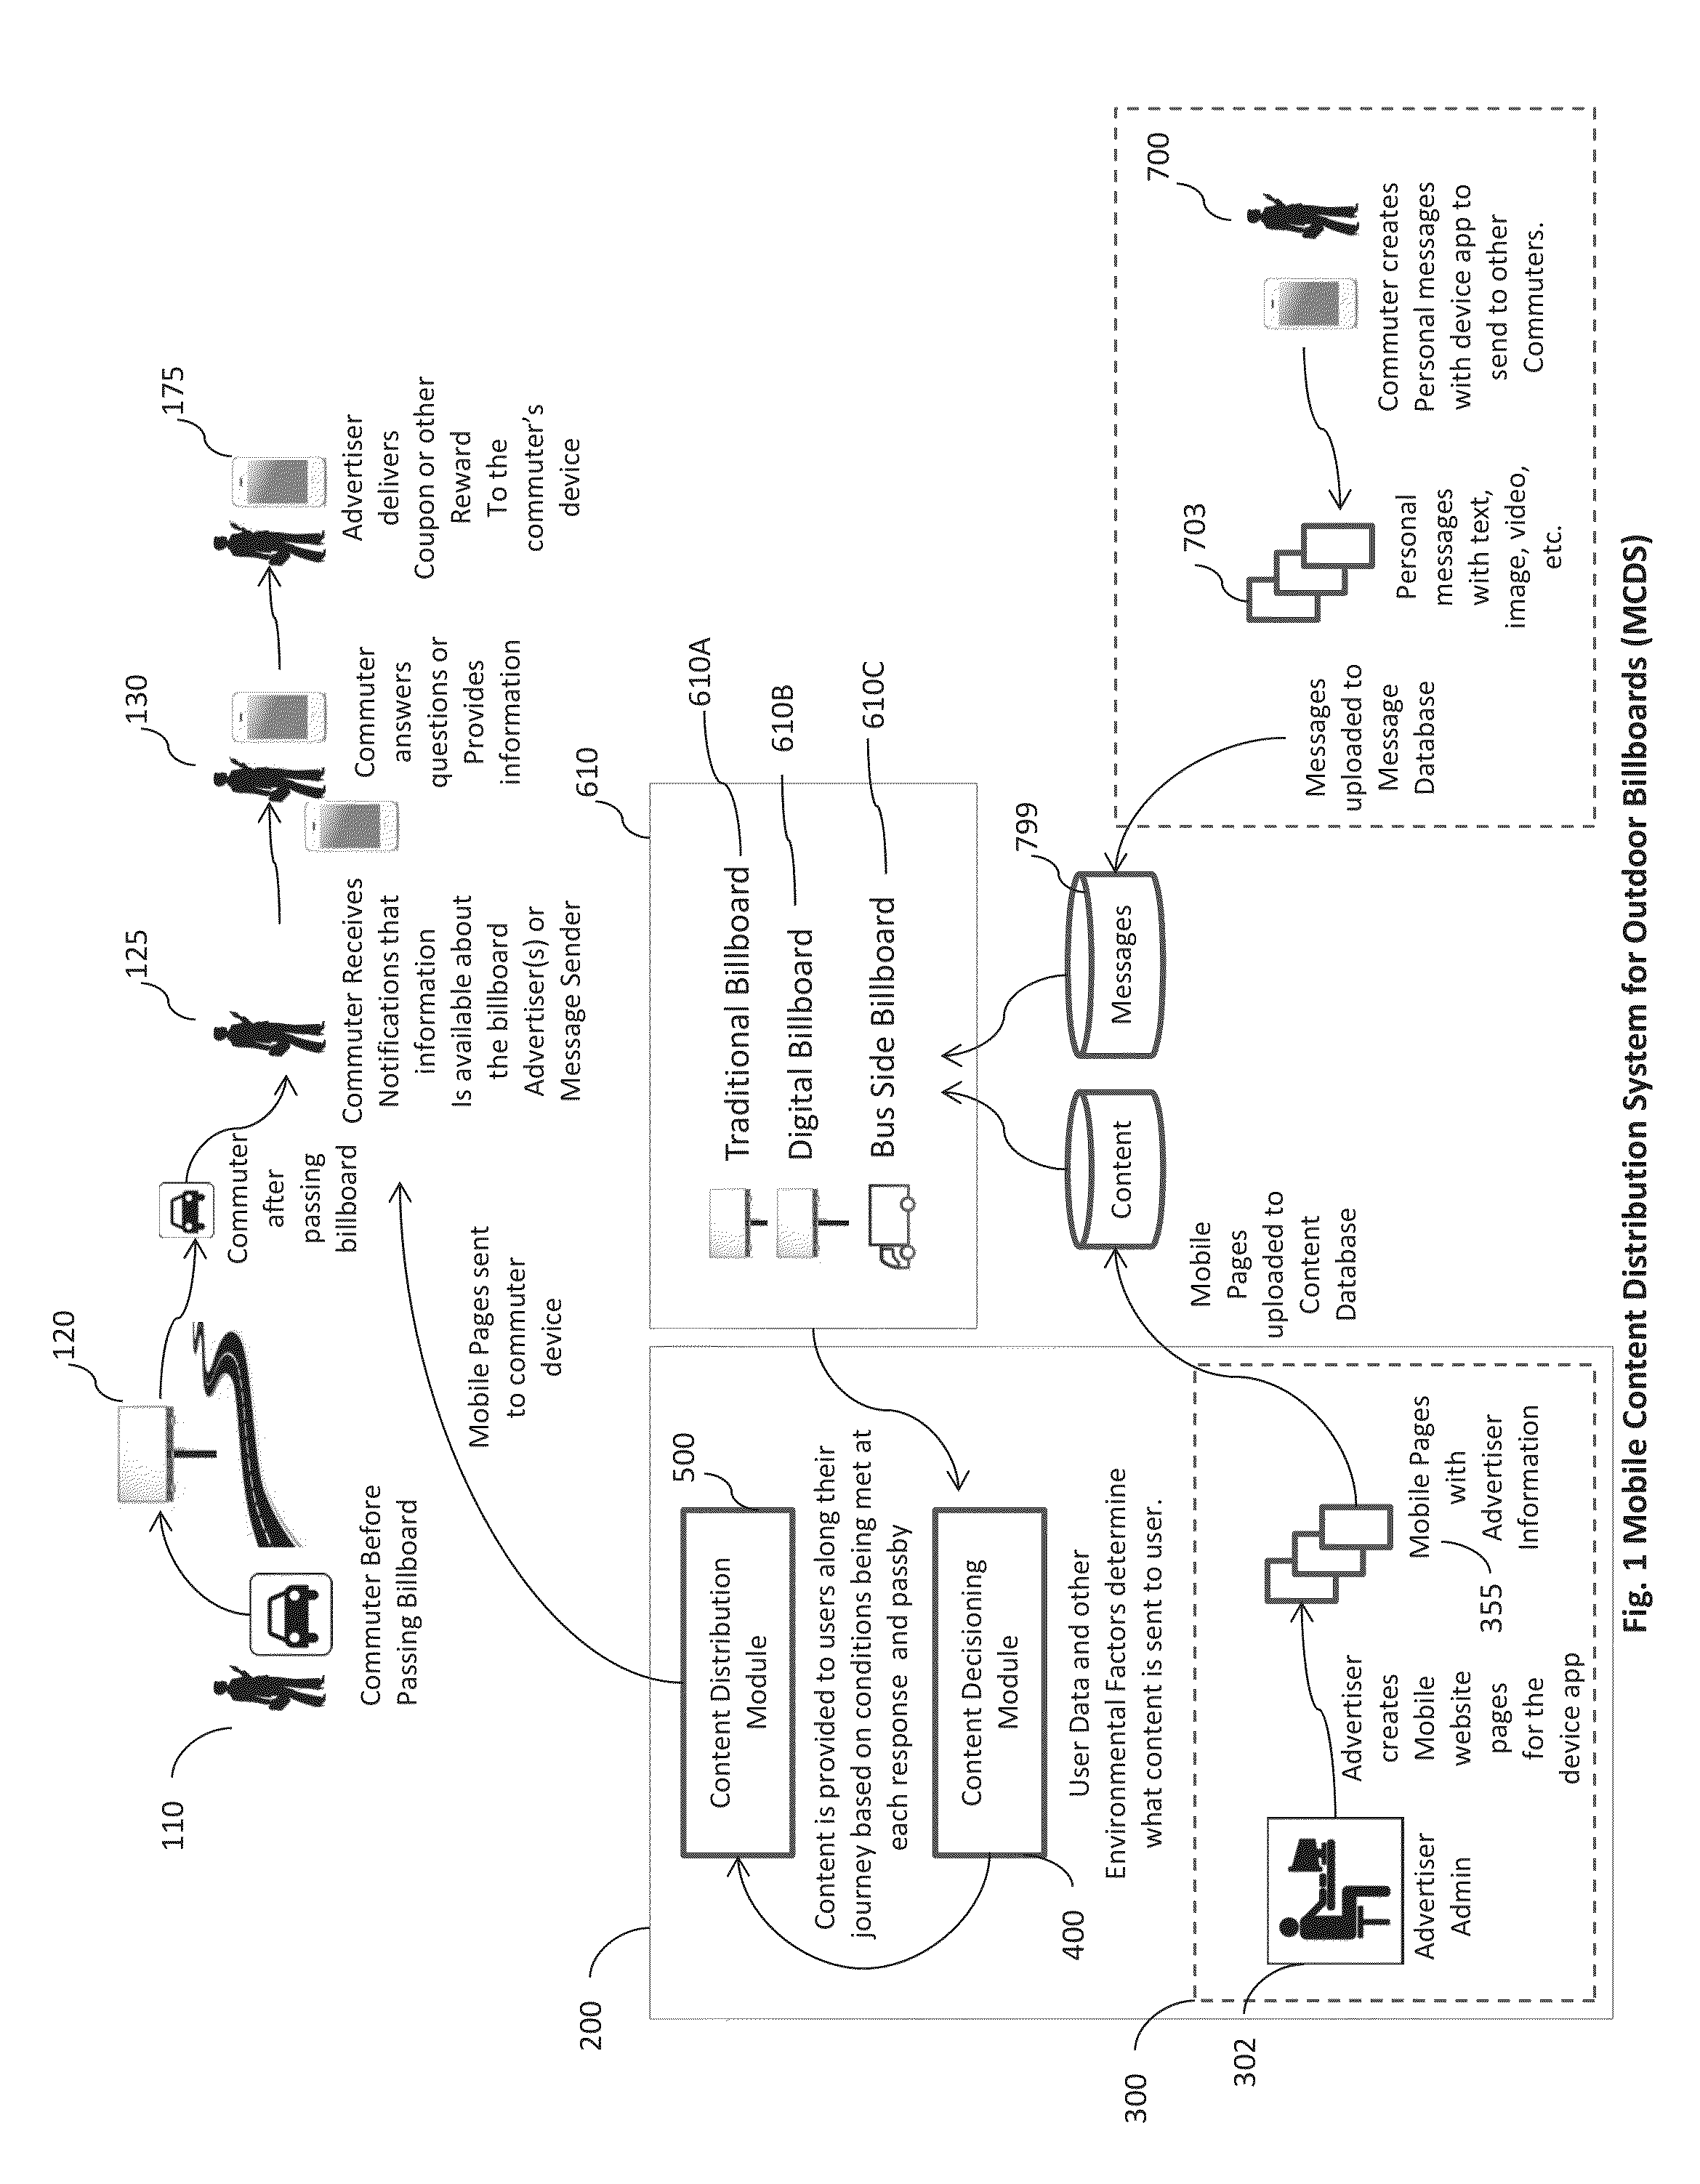 System and Methods for Geographically-Driven Downstream Distribution of Mobile Content